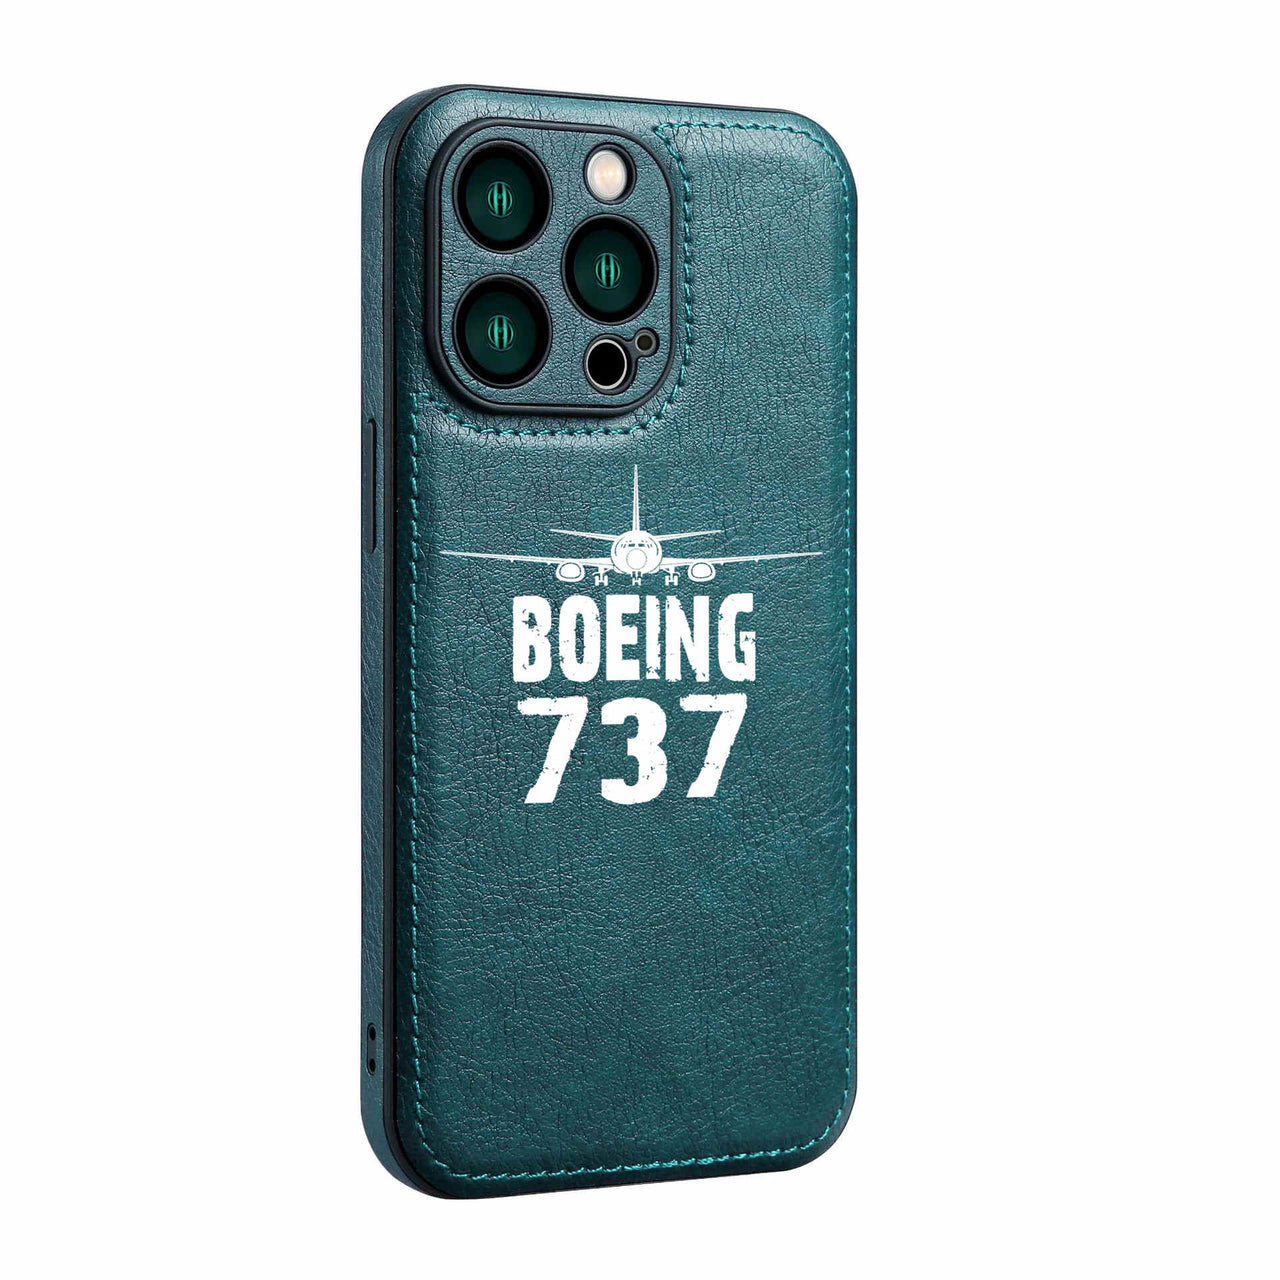 Boeing 737 & Plane Designed Leather iPhone Cases